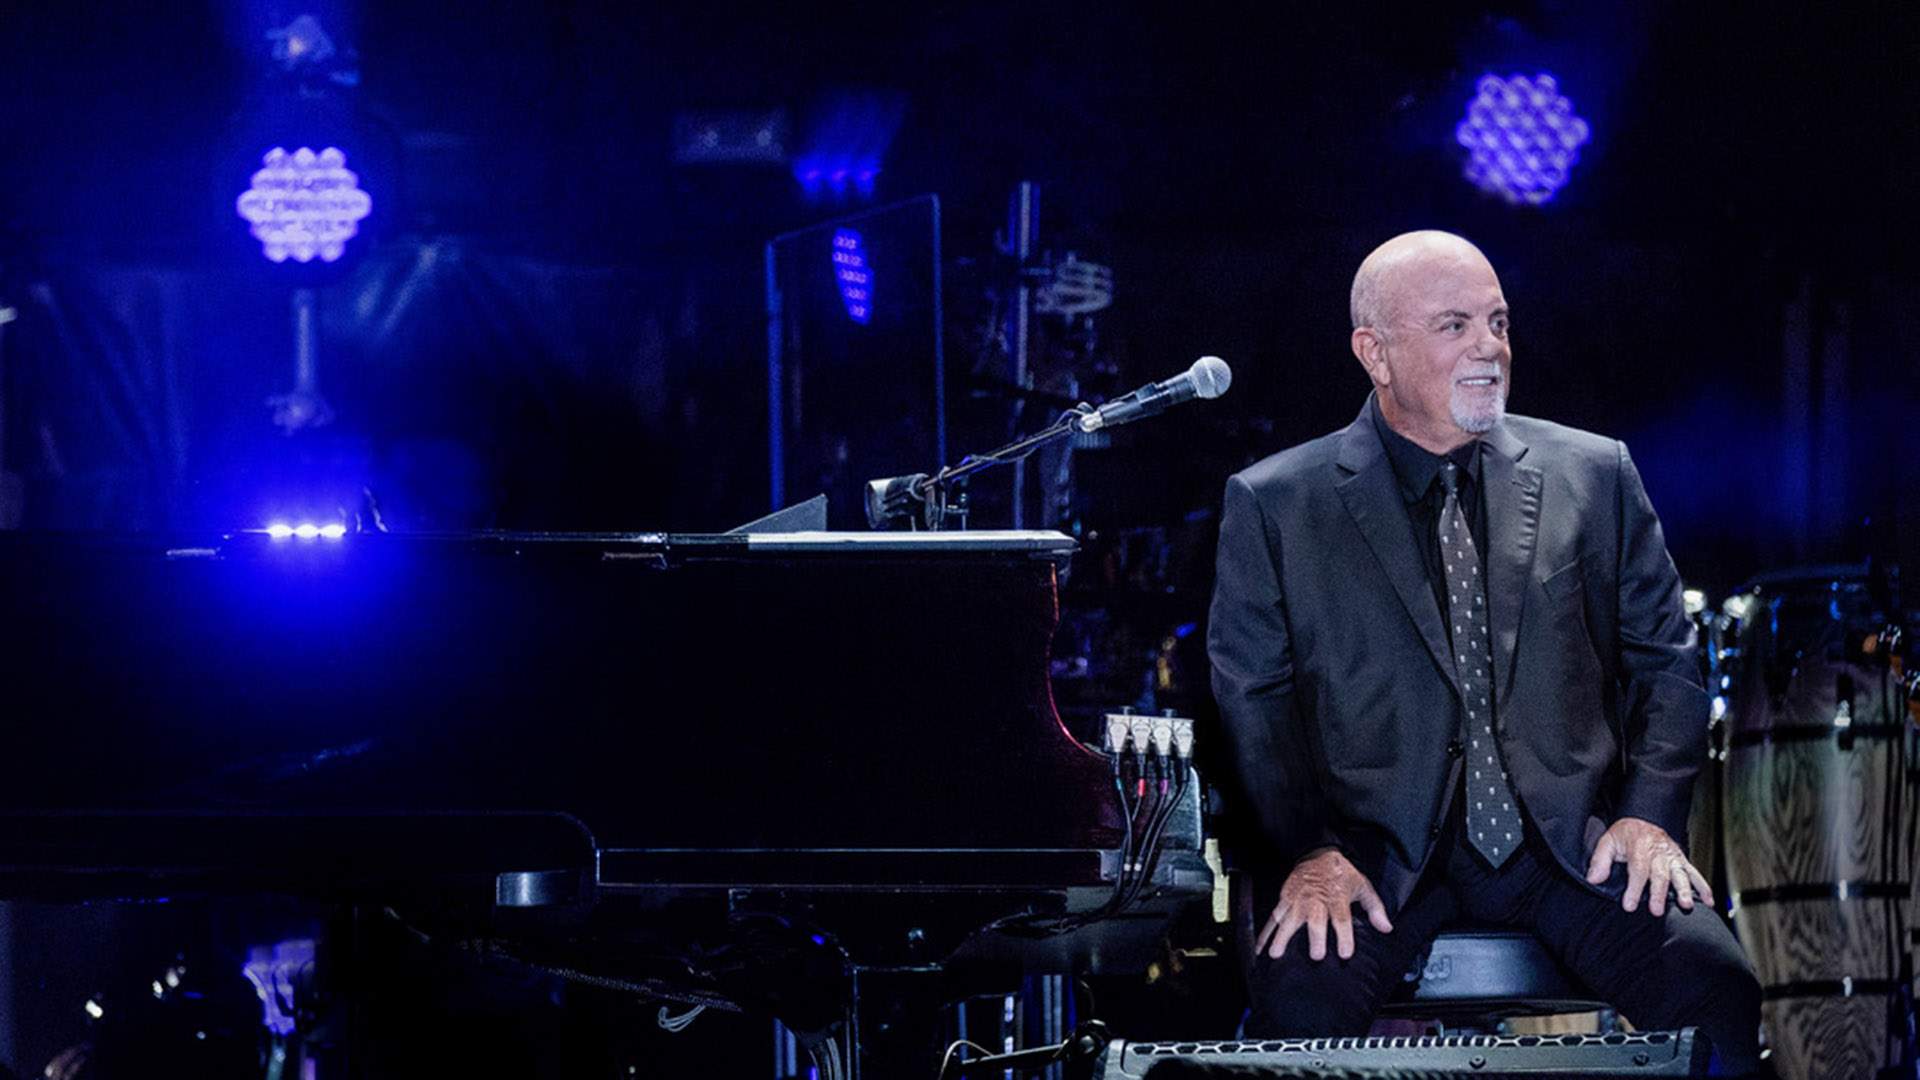 Billy Joel Is Coming to Australia This Summer Just for One Huge Concert at the MCG